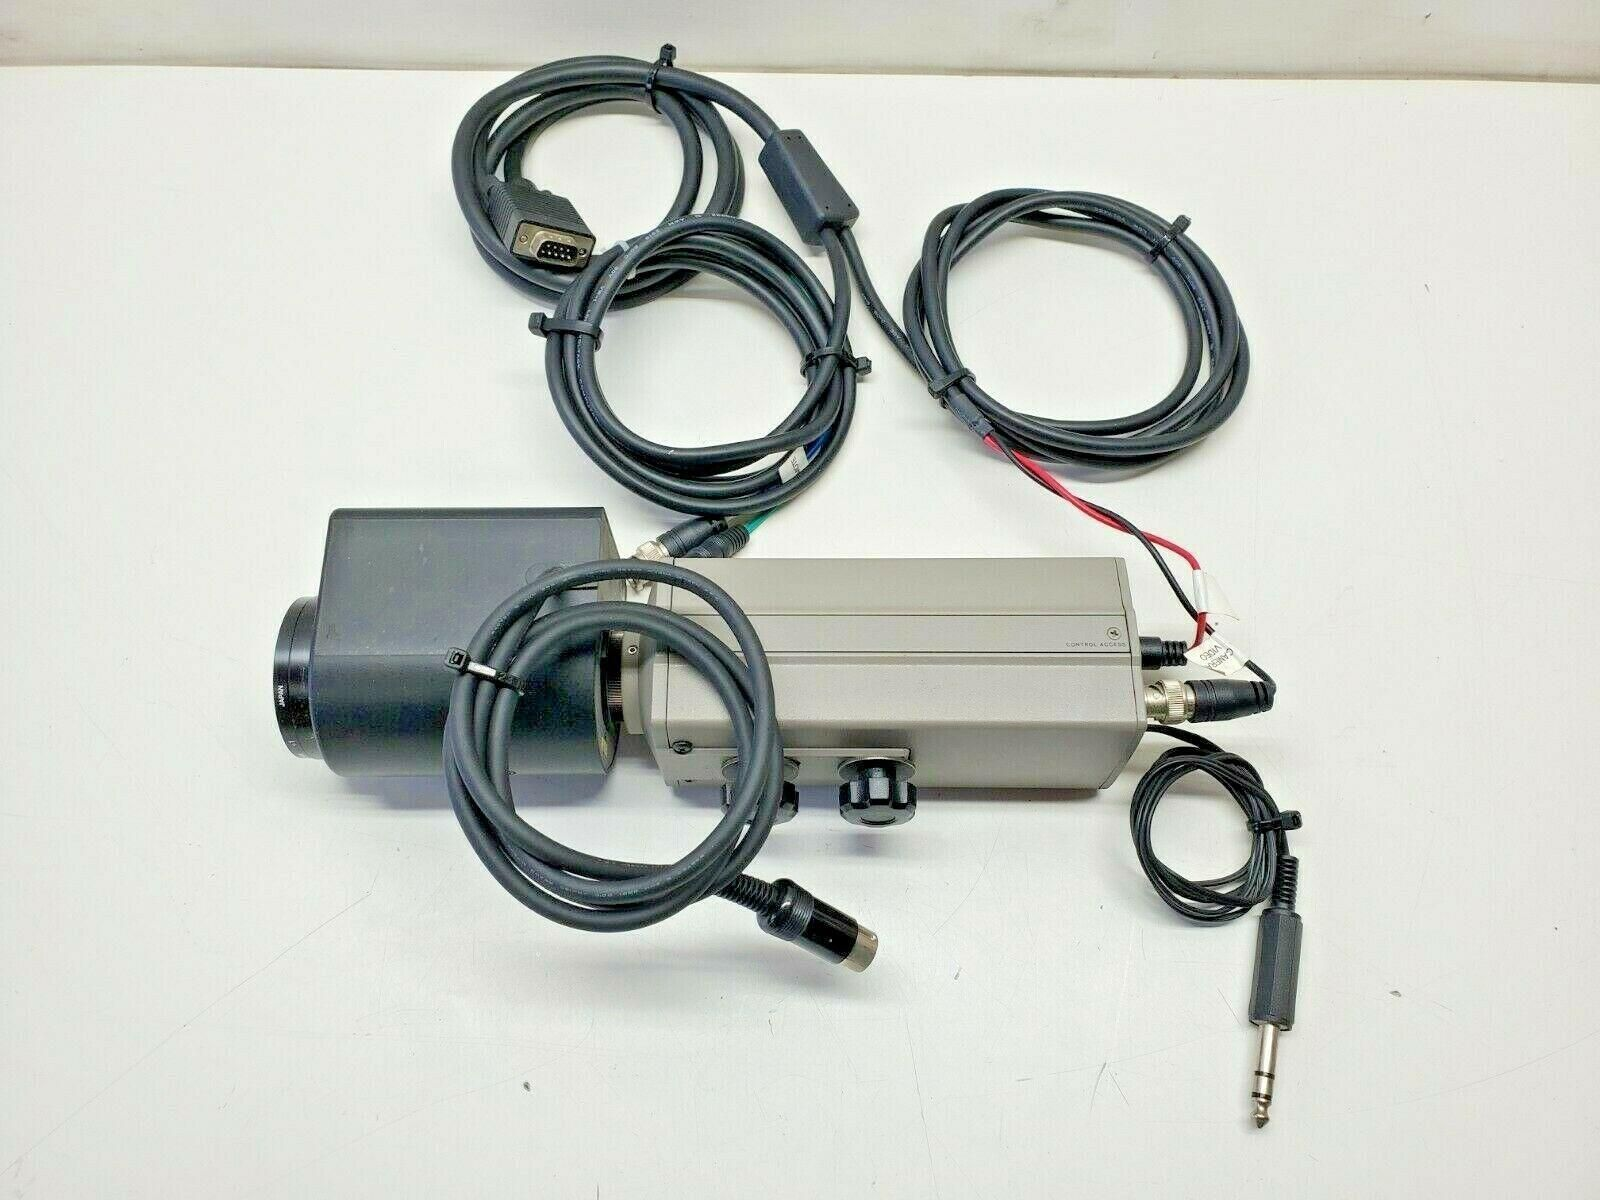 Alpha Innotech Model RS170 Camera for Gel Imaging w/ Cables